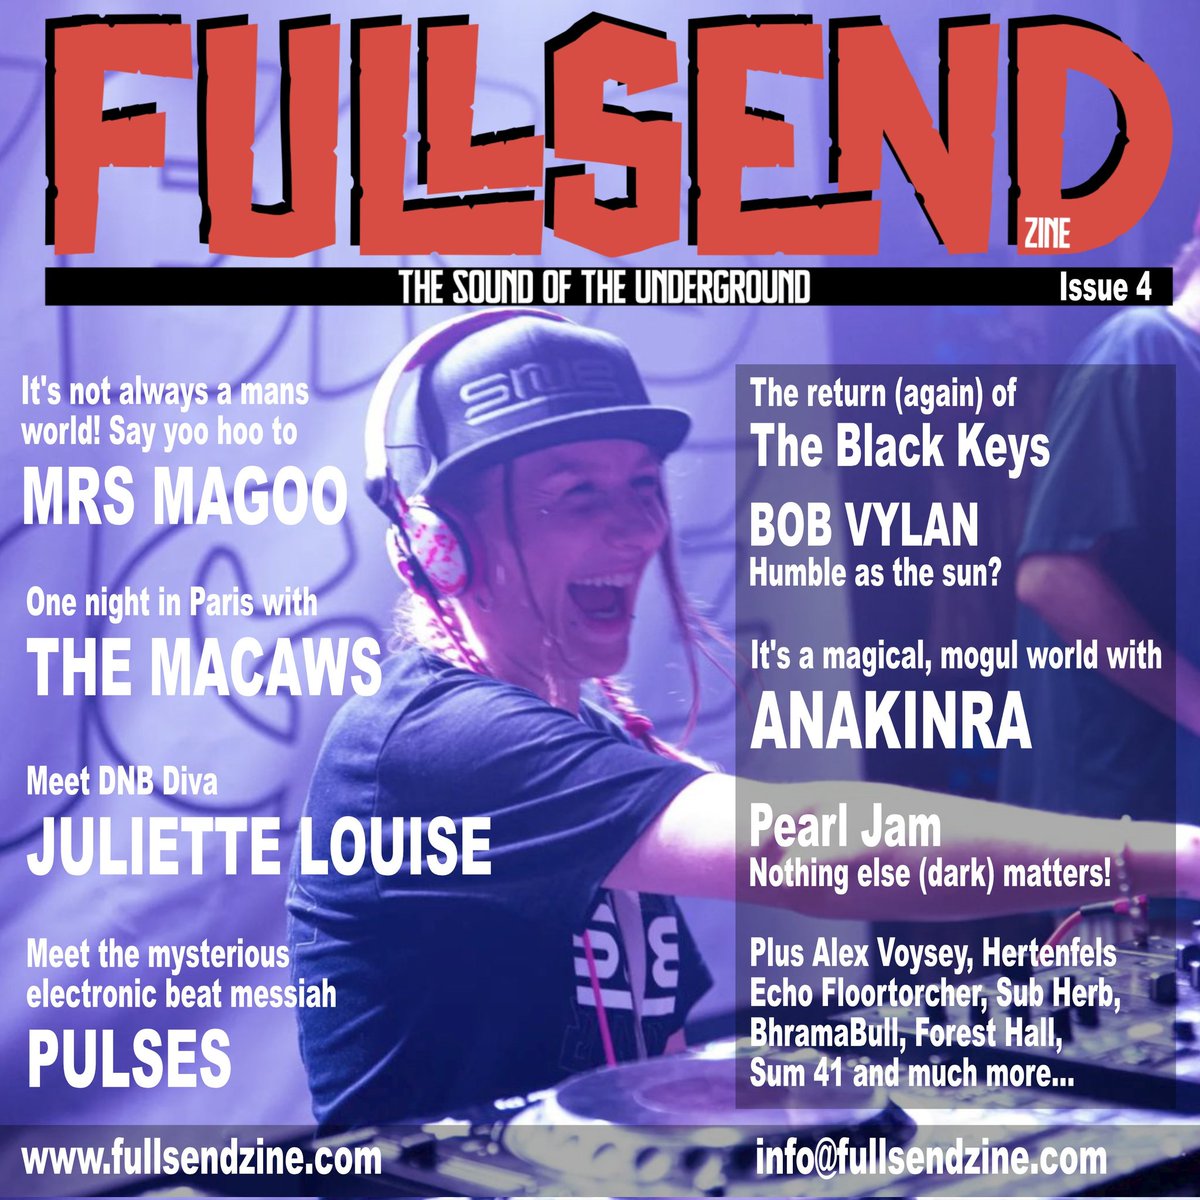 Big love to @CircleRed_DNB for inviting me to take part in an interview for Full Send Zine. It was a really fun Q&A! Peep the 🔗 fullsendzine.com The April issue of Full Send Zine is now live & packed with great interviews, reviews & news from the sounds of the underground